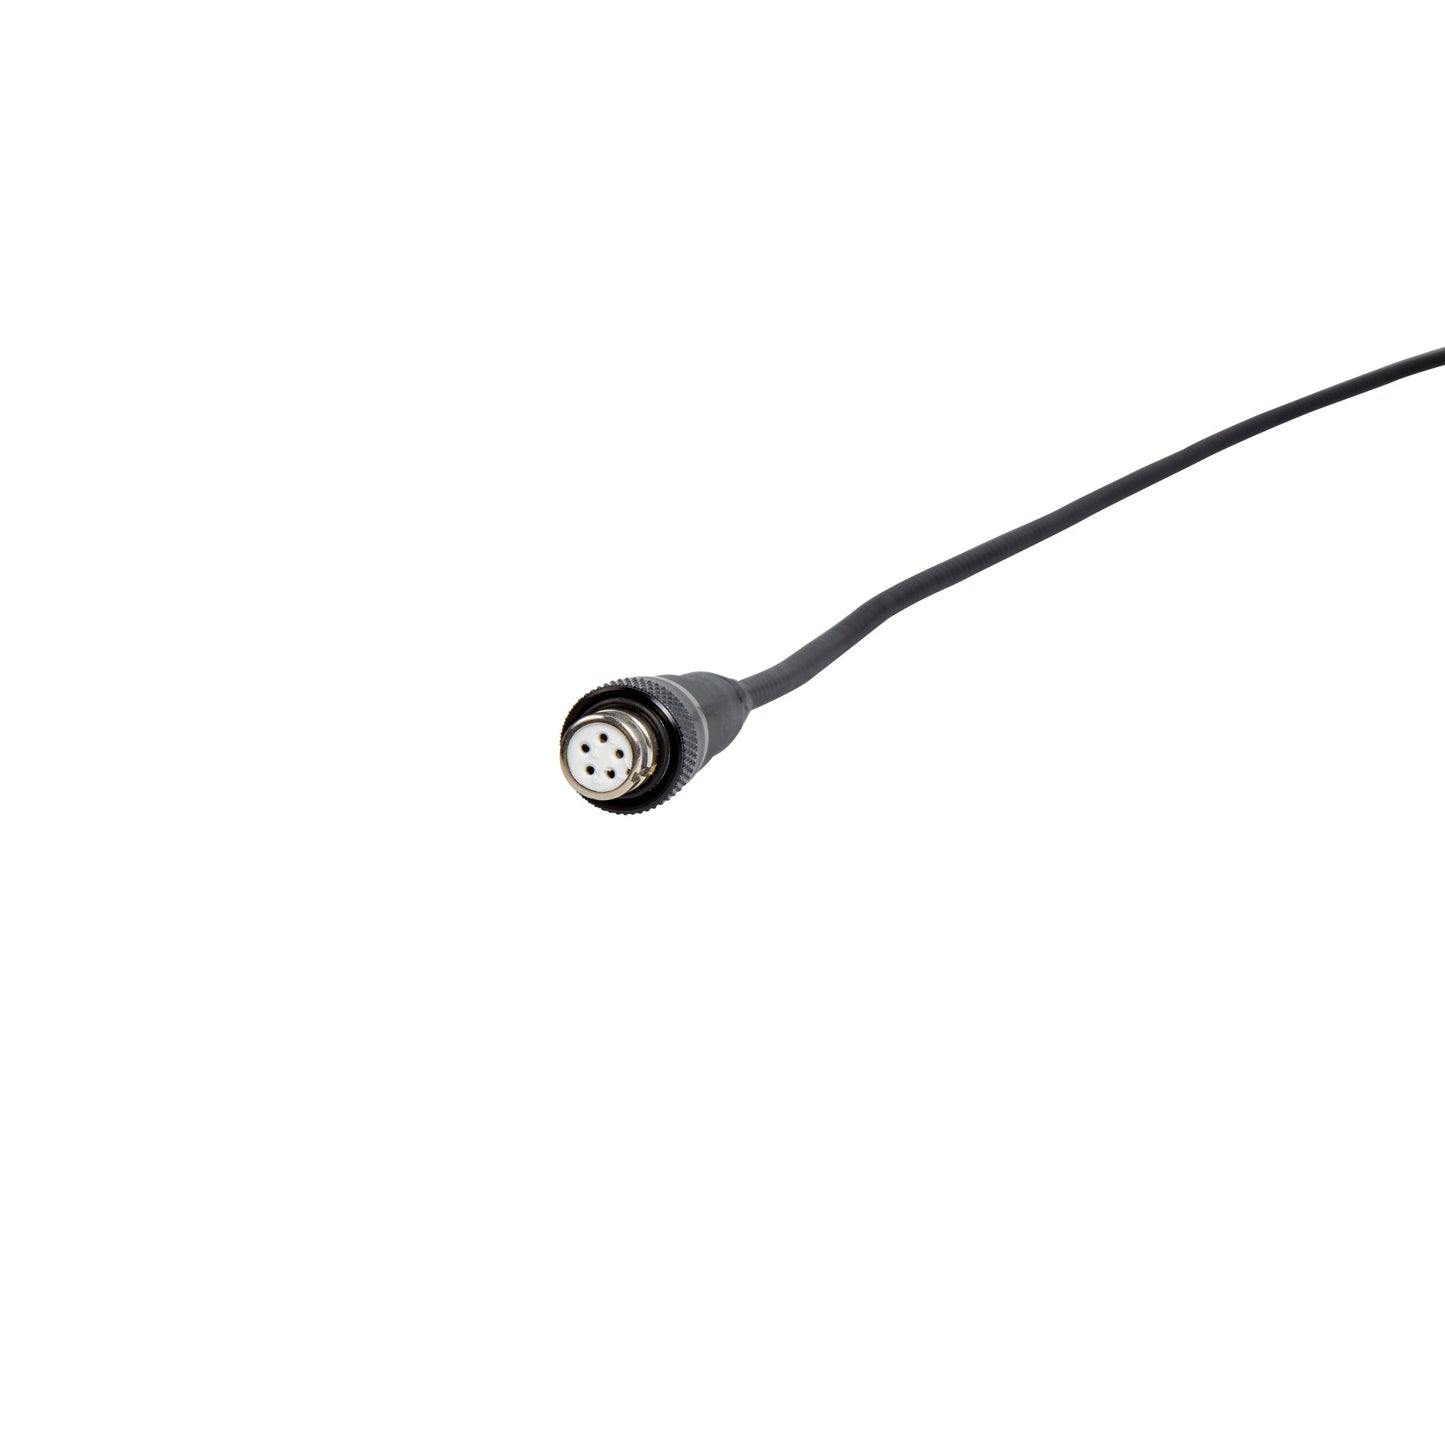 3-Foot x 5.5mm Replacement Video Scope Camera Probe